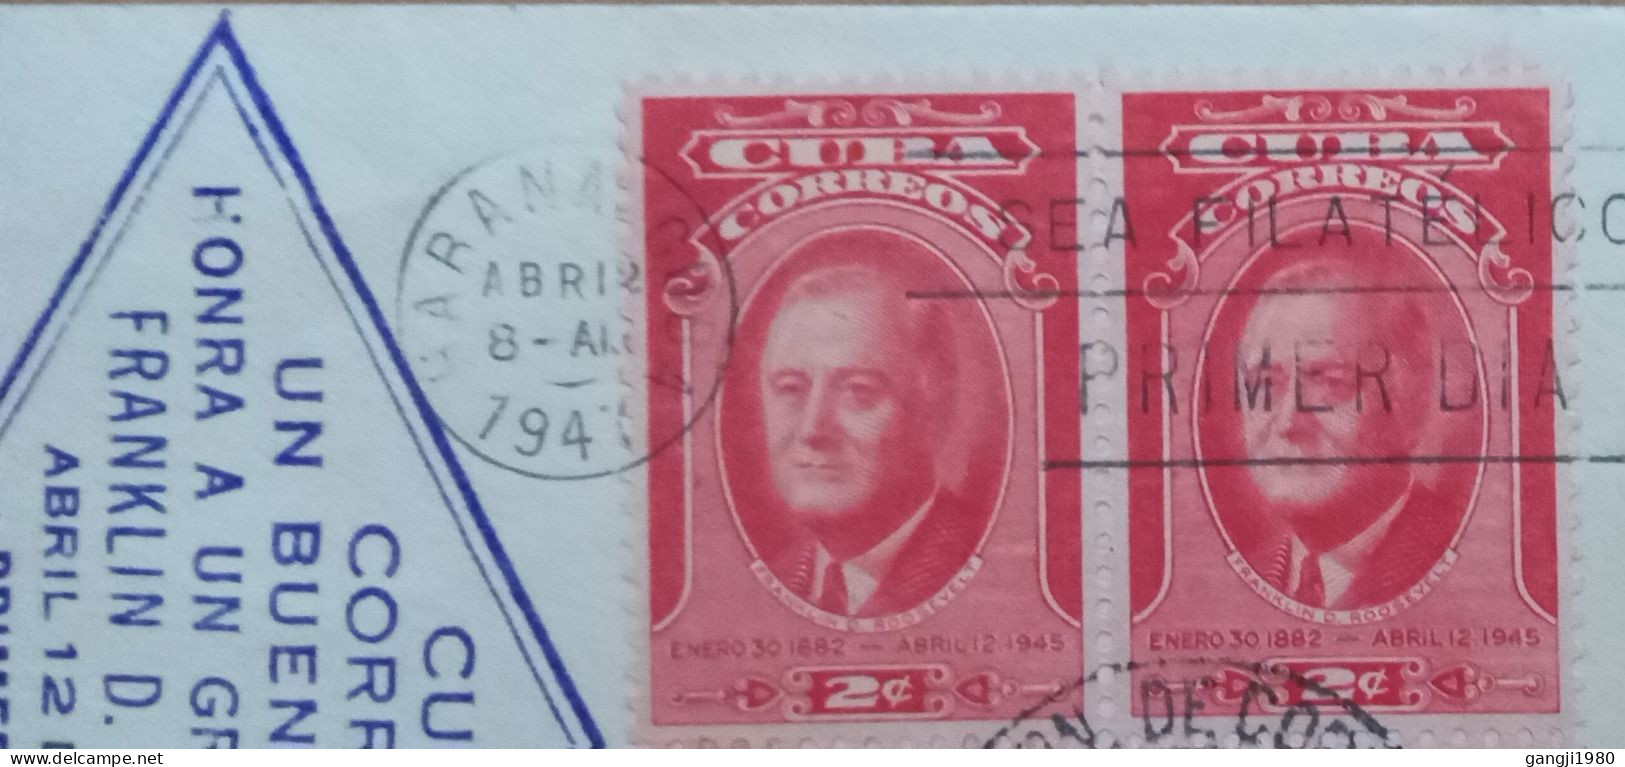 CUBA-USA 1947, FDC COVER, FRANKLIN D.ROOSEVELT, ILLUSTRATE, BLOCK OF 4 STAMP, HABANA CITY 2 DIFF CANCEL, DIAMOND SHAPE - Lettres & Documents